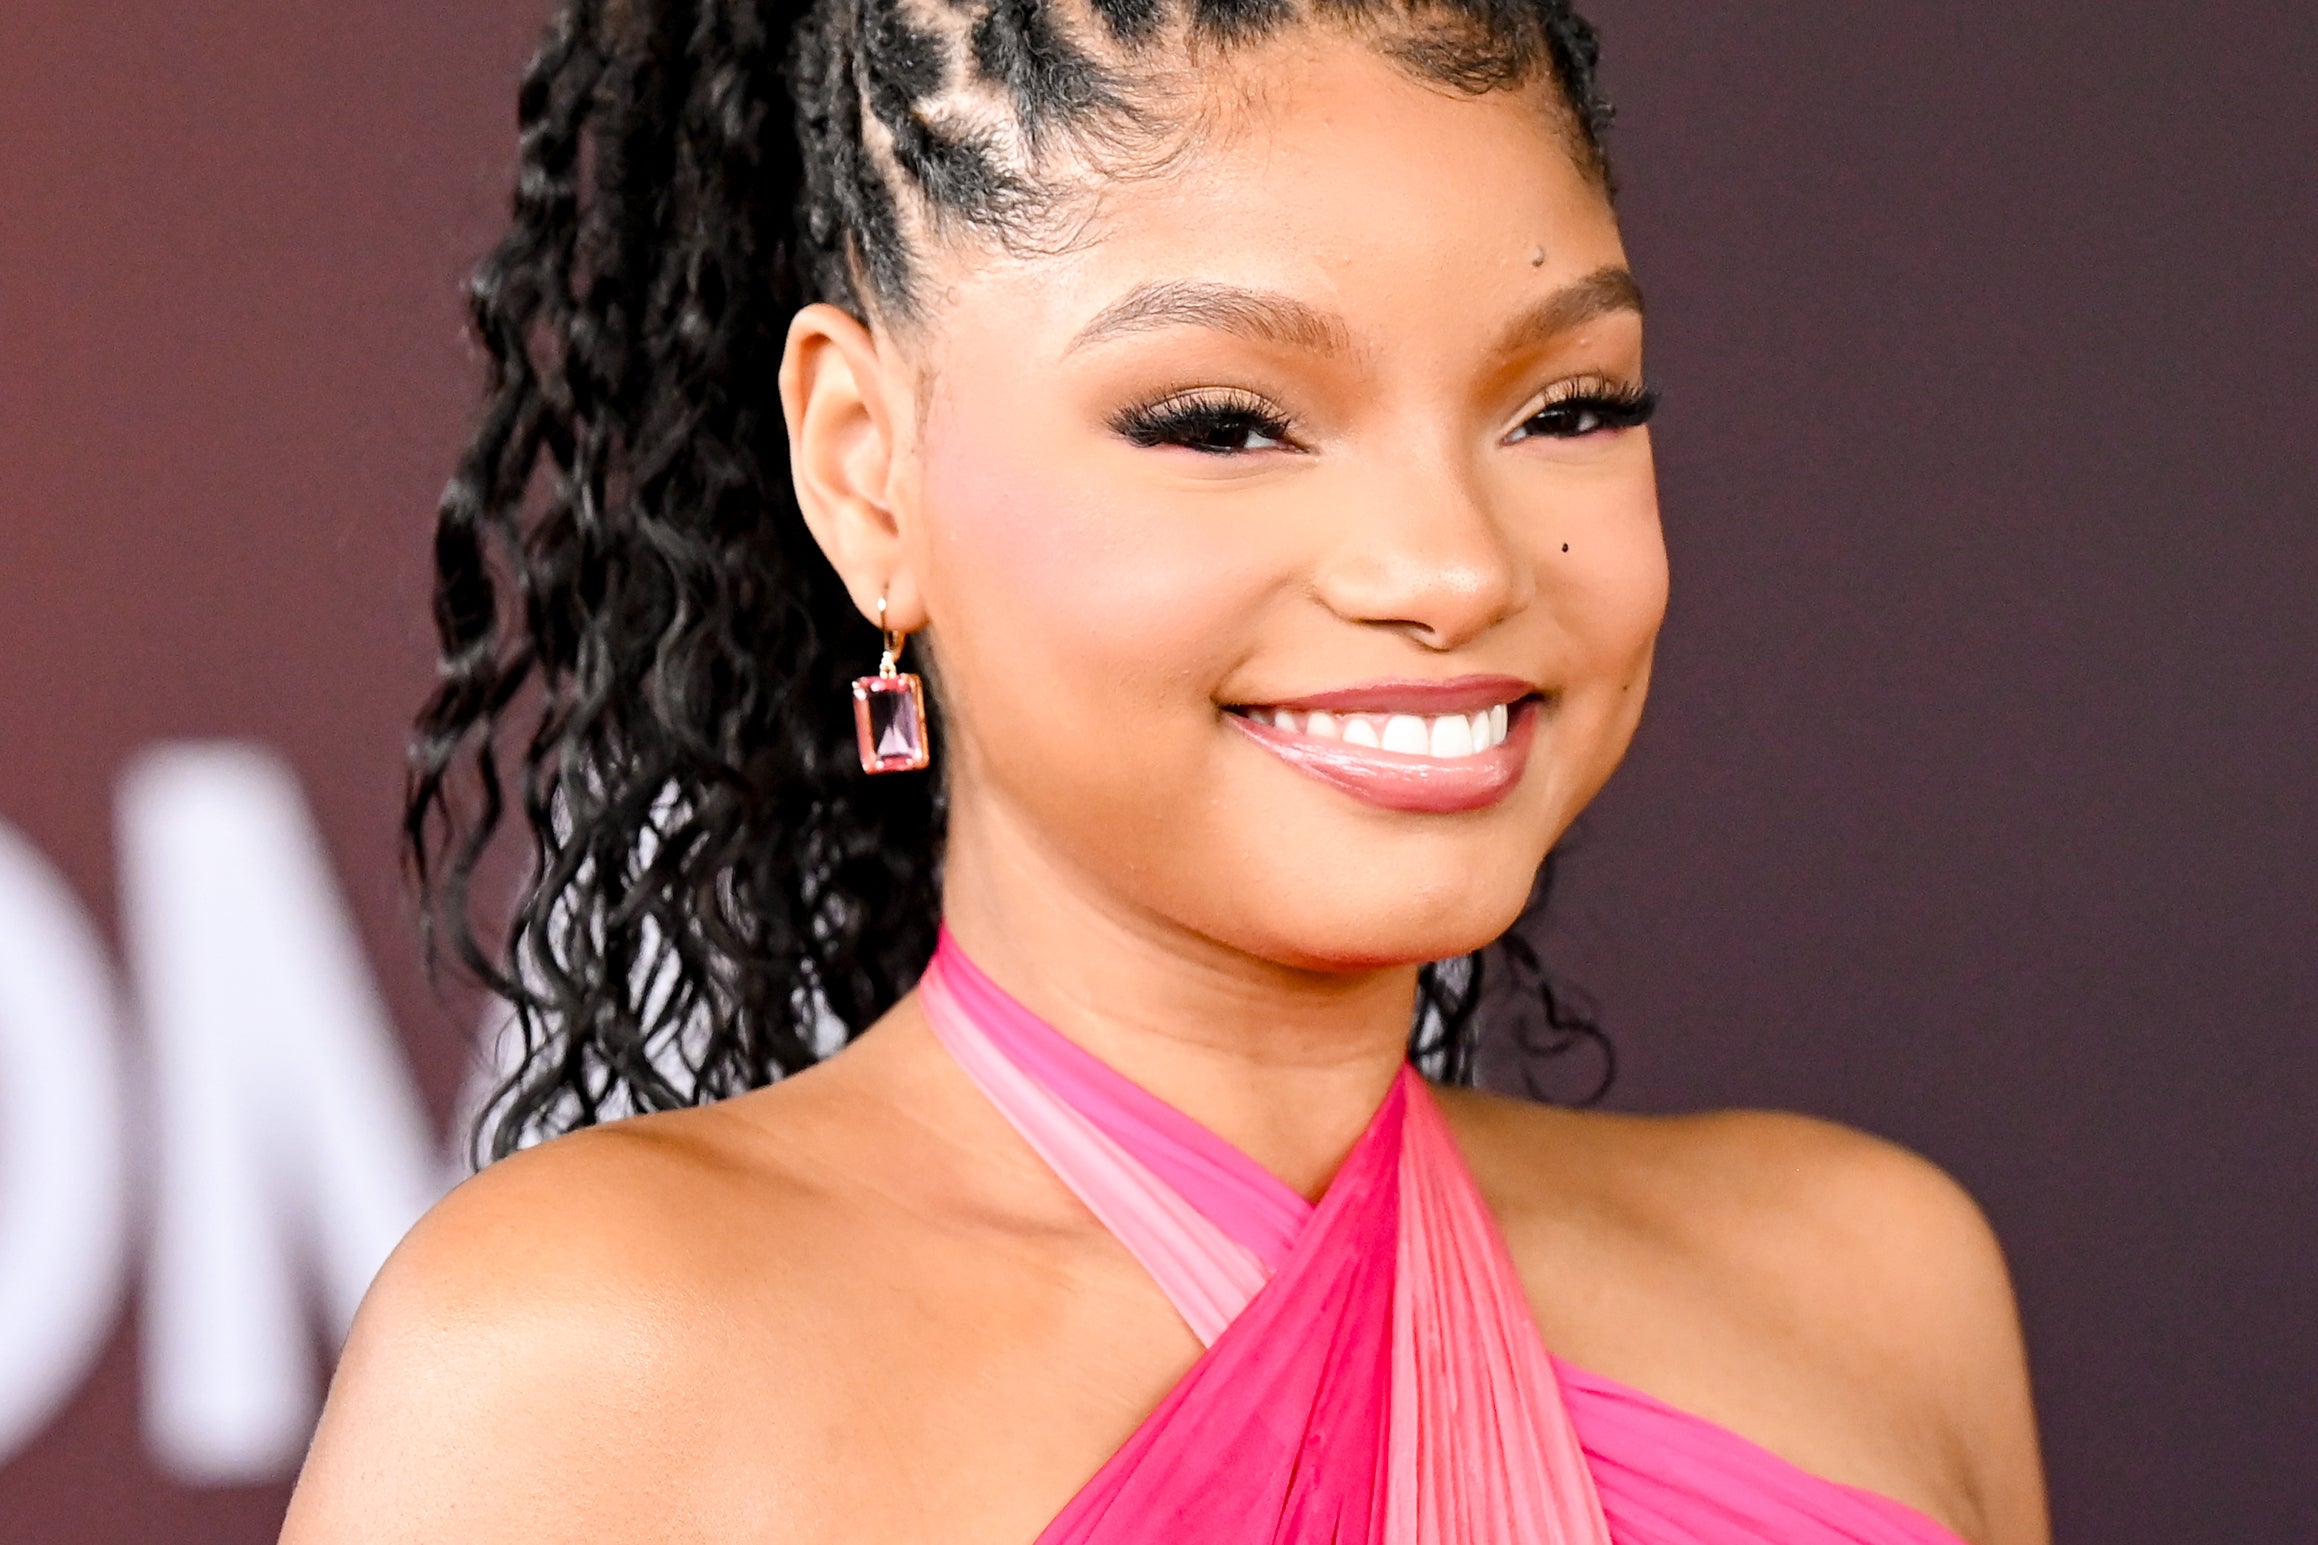 Halle Bailey Revealed The First Photo Of Her Child Halo’s Face, And The Internet Loves It